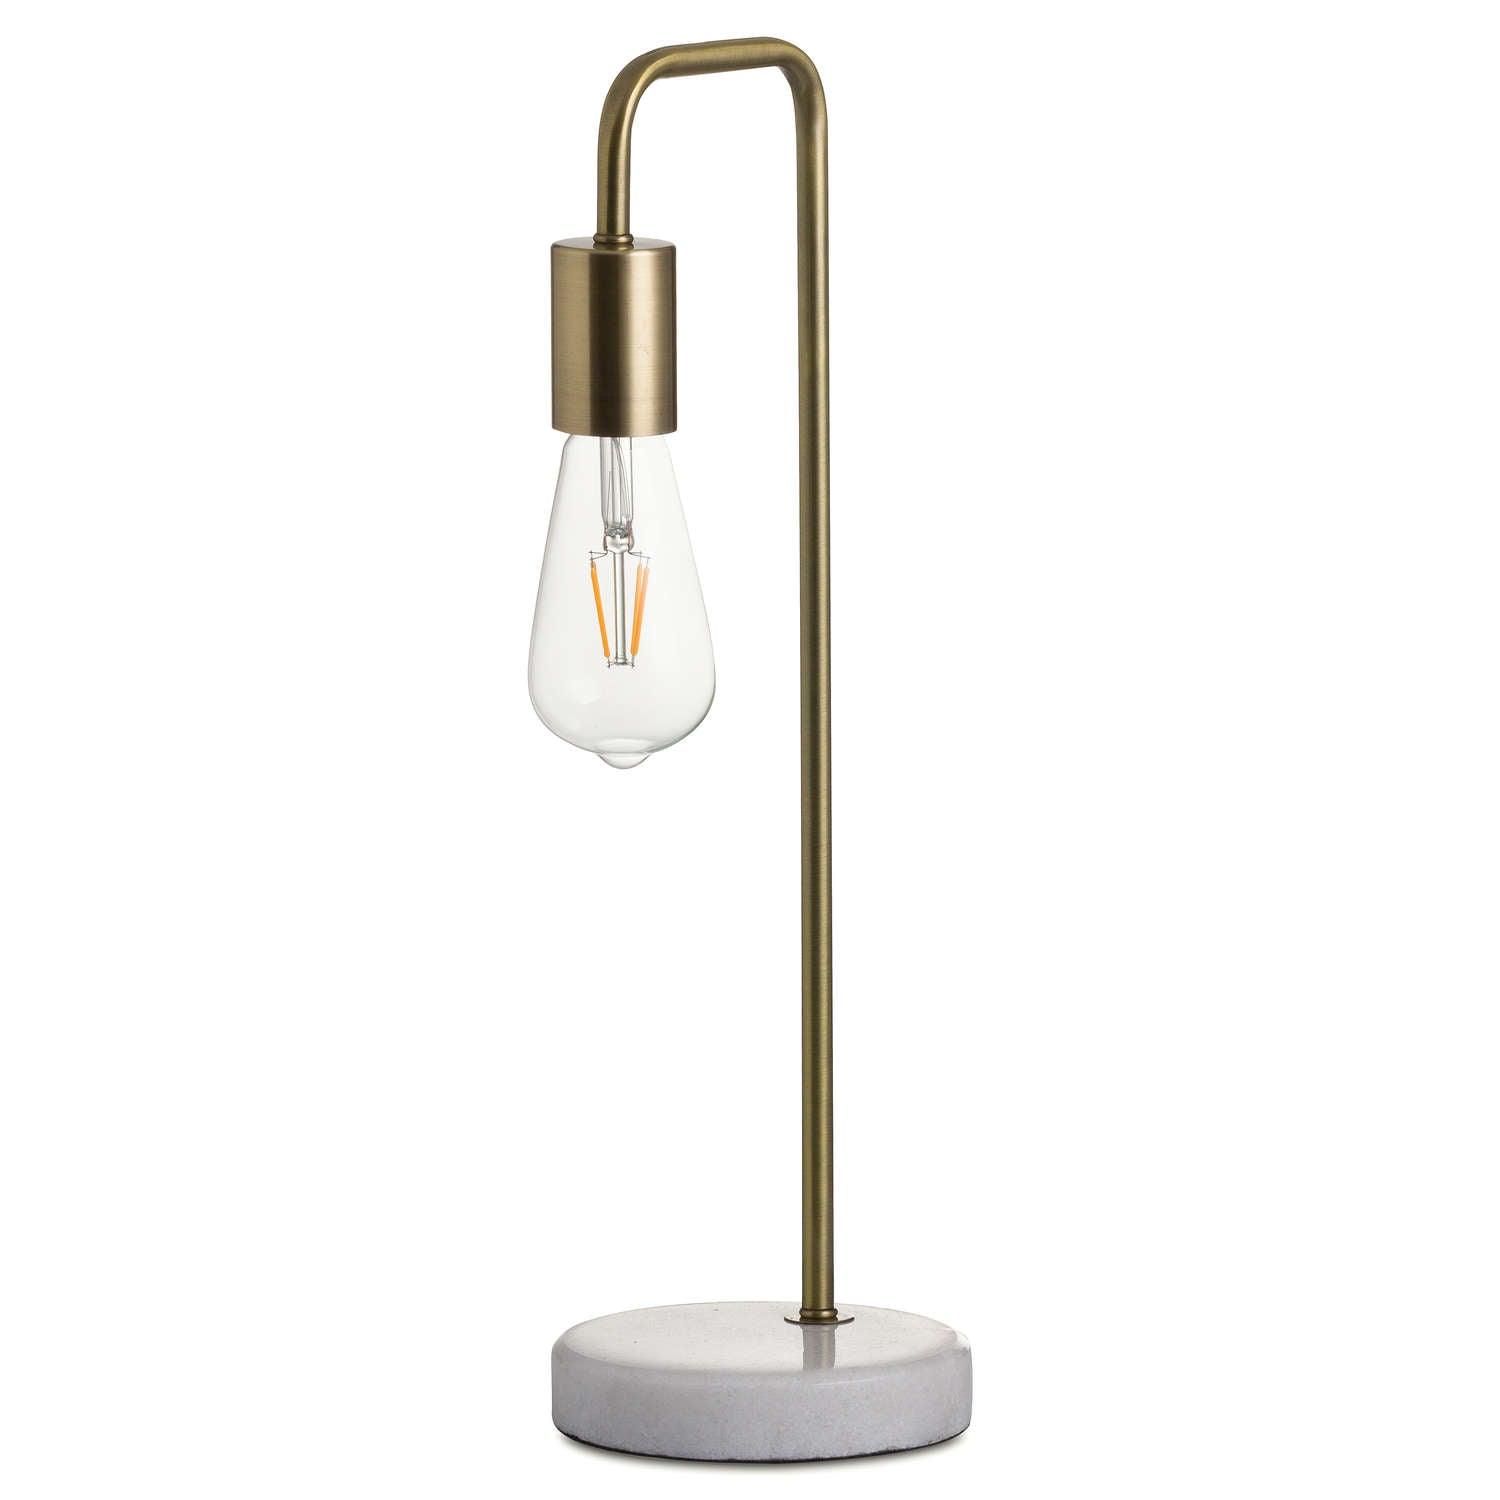 View Marble And Brass Industrial Desk Lamp information